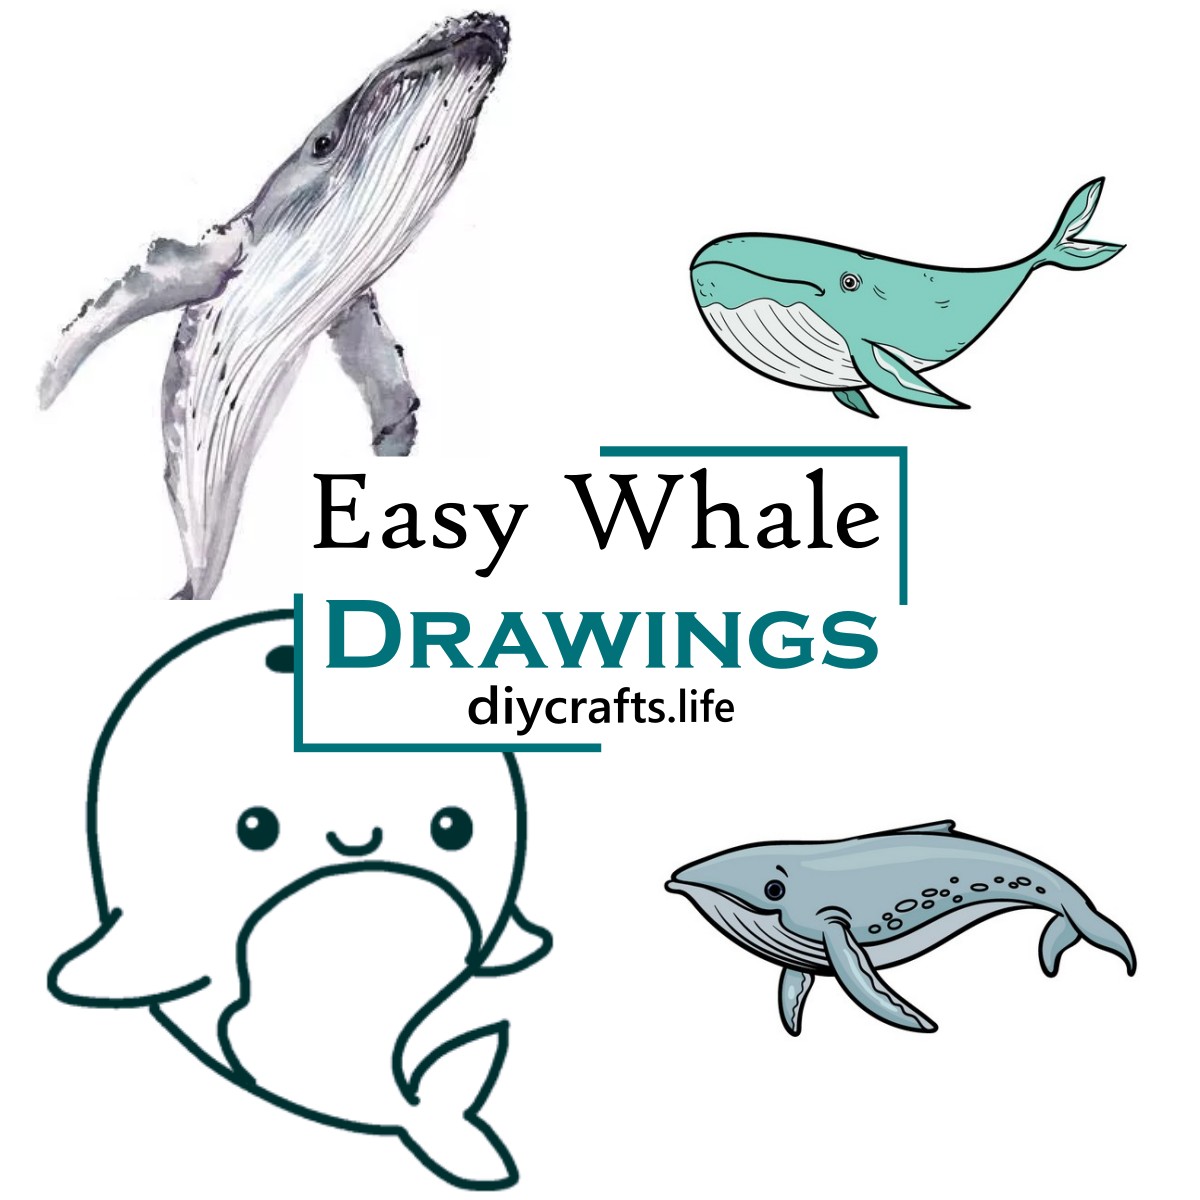 How to Draw a Whale? - Step by Step Drawing Guide for Kids